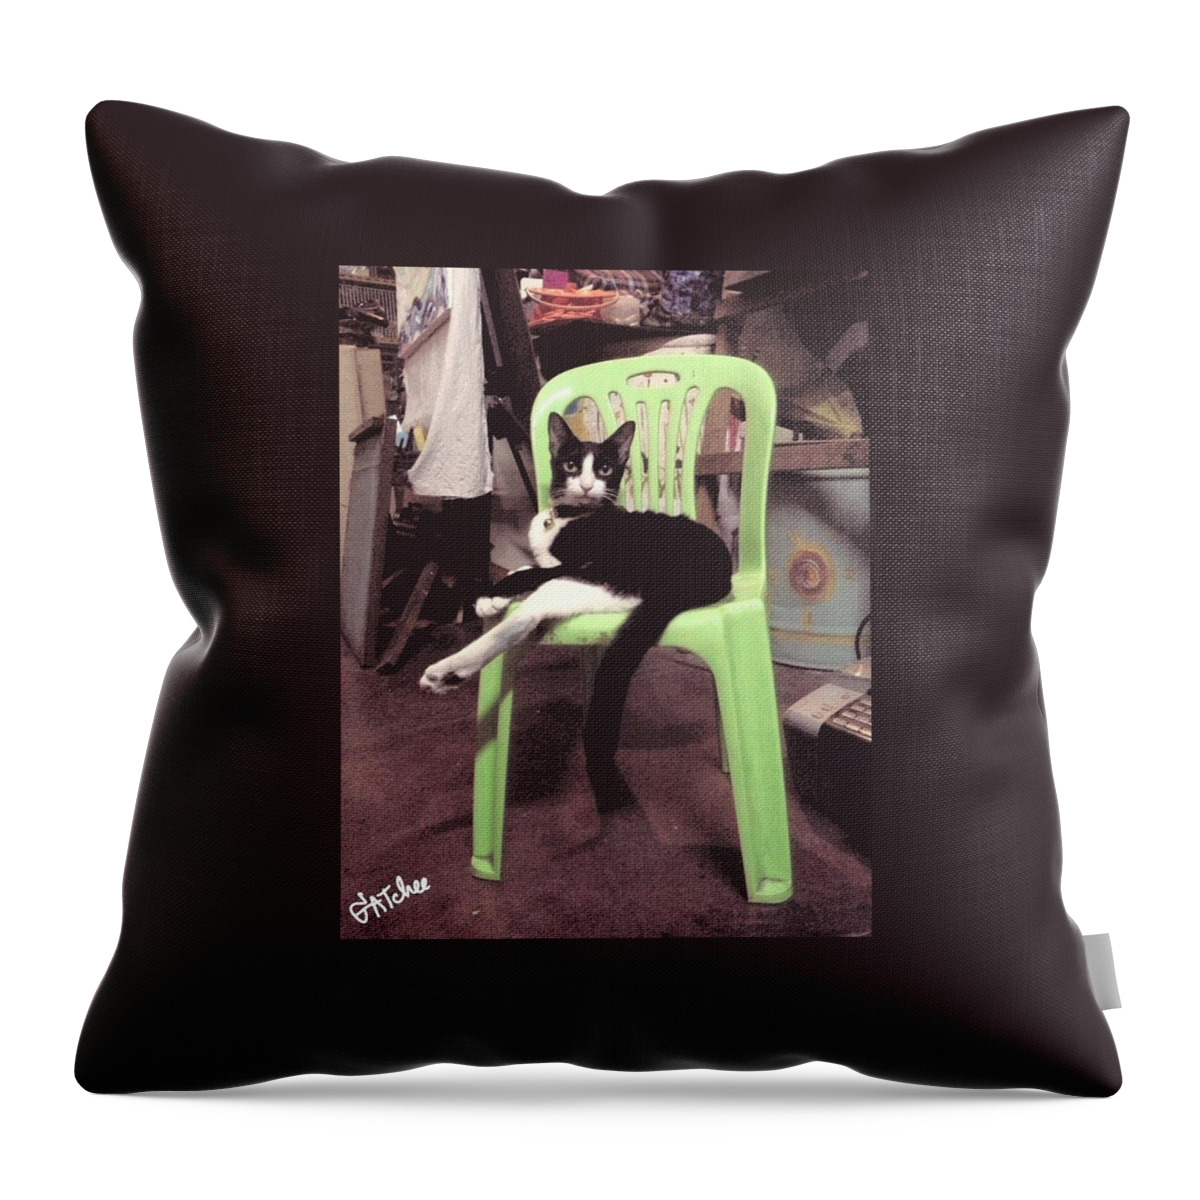 Gatchee Throw Pillow featuring the photograph Looking At Me by Sukalya Chearanantana